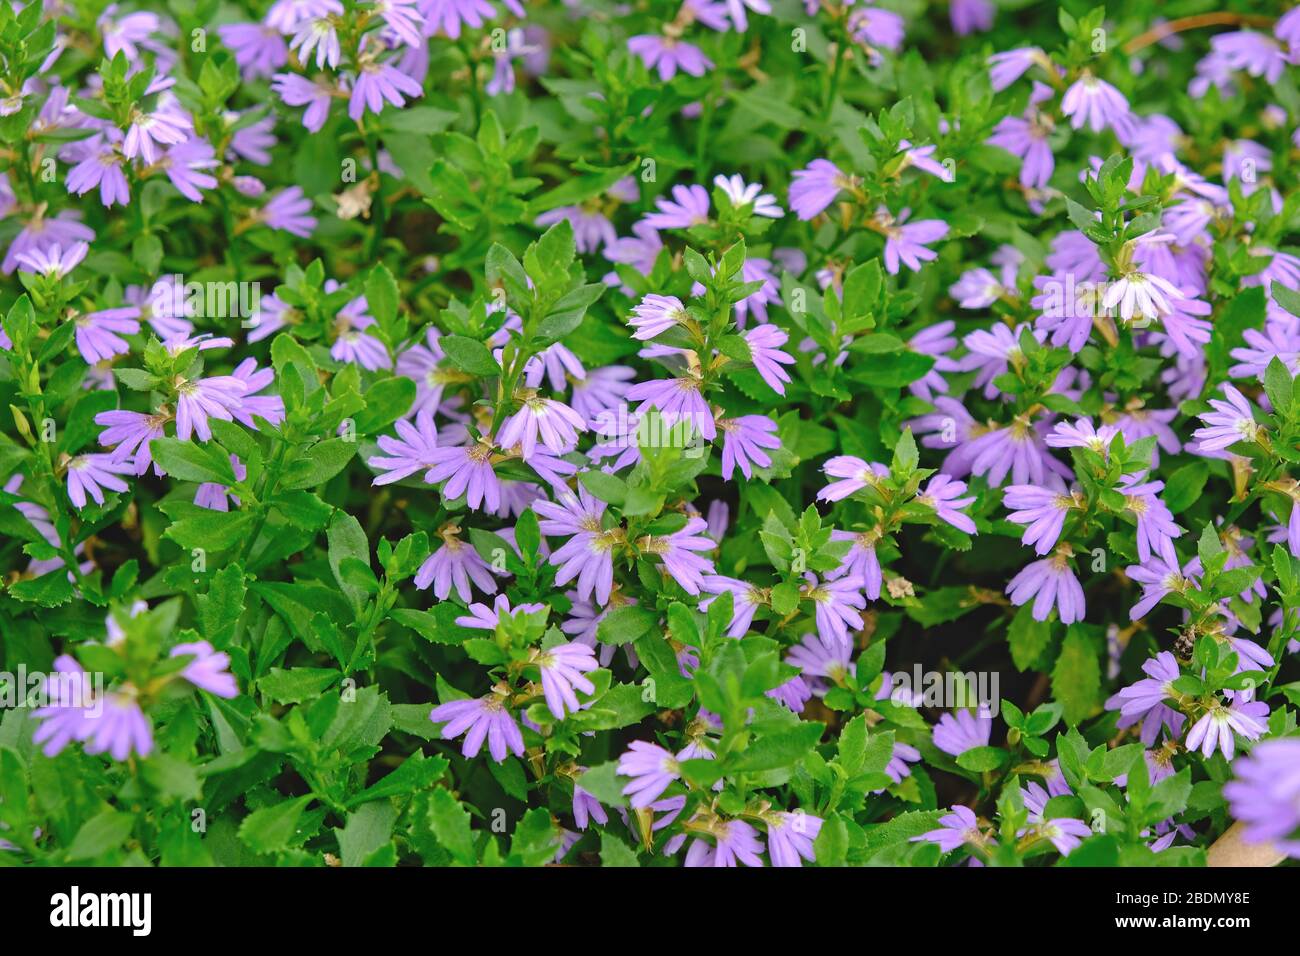 Mauve Scaevola flowers surrounded by the leaves of the plant. Stock Photo